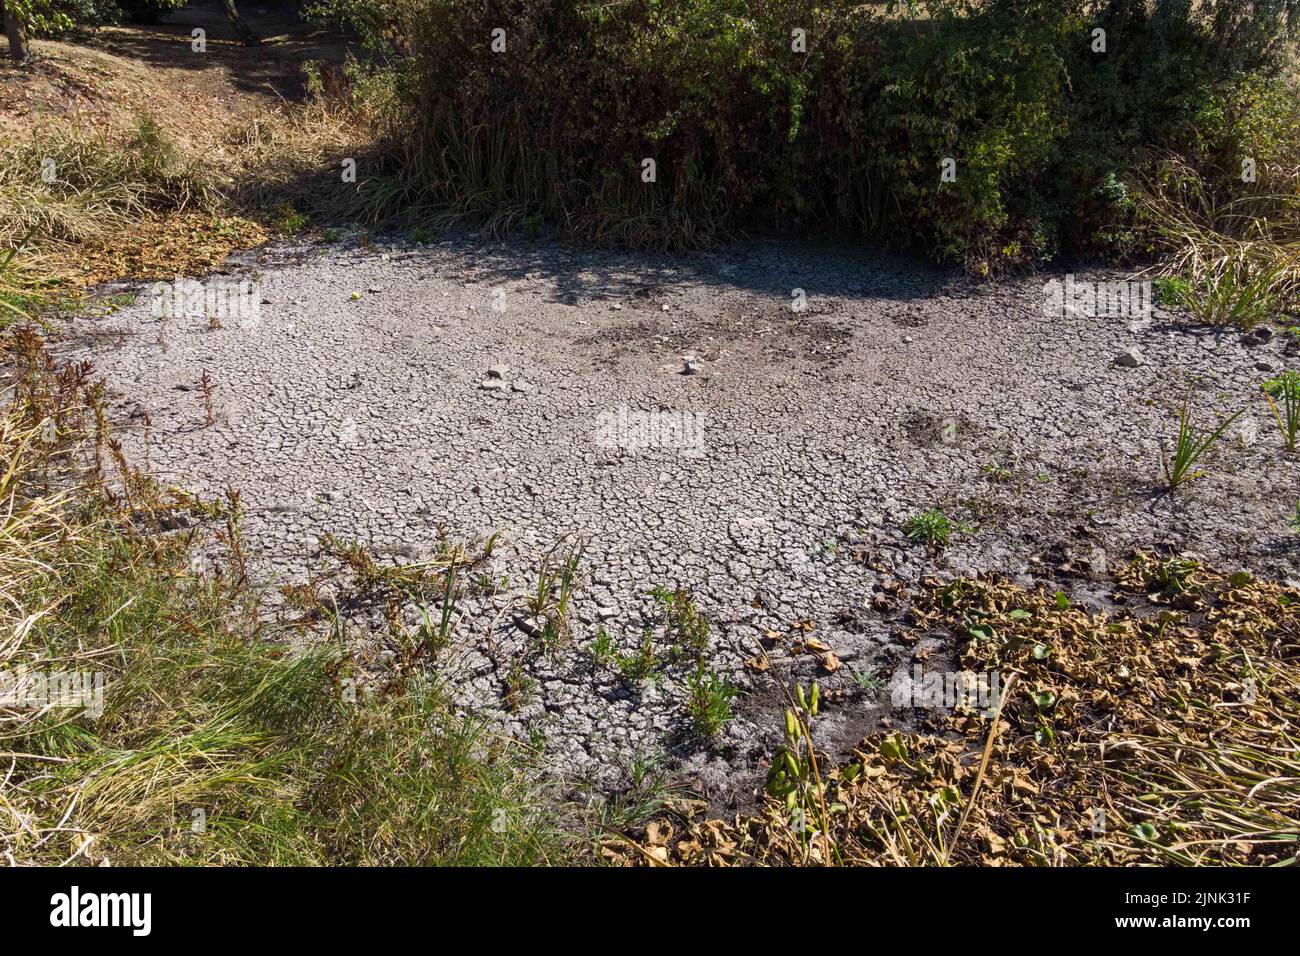 Forthampton, Gloucestershire August 12th 2022 - A dried up heart-shaped pond in the small historic hamlet of Forthampton in Gloucestershire which has been hit hard by drought conditions. Credit: Scott CM / Alamy Live News Stock Photo